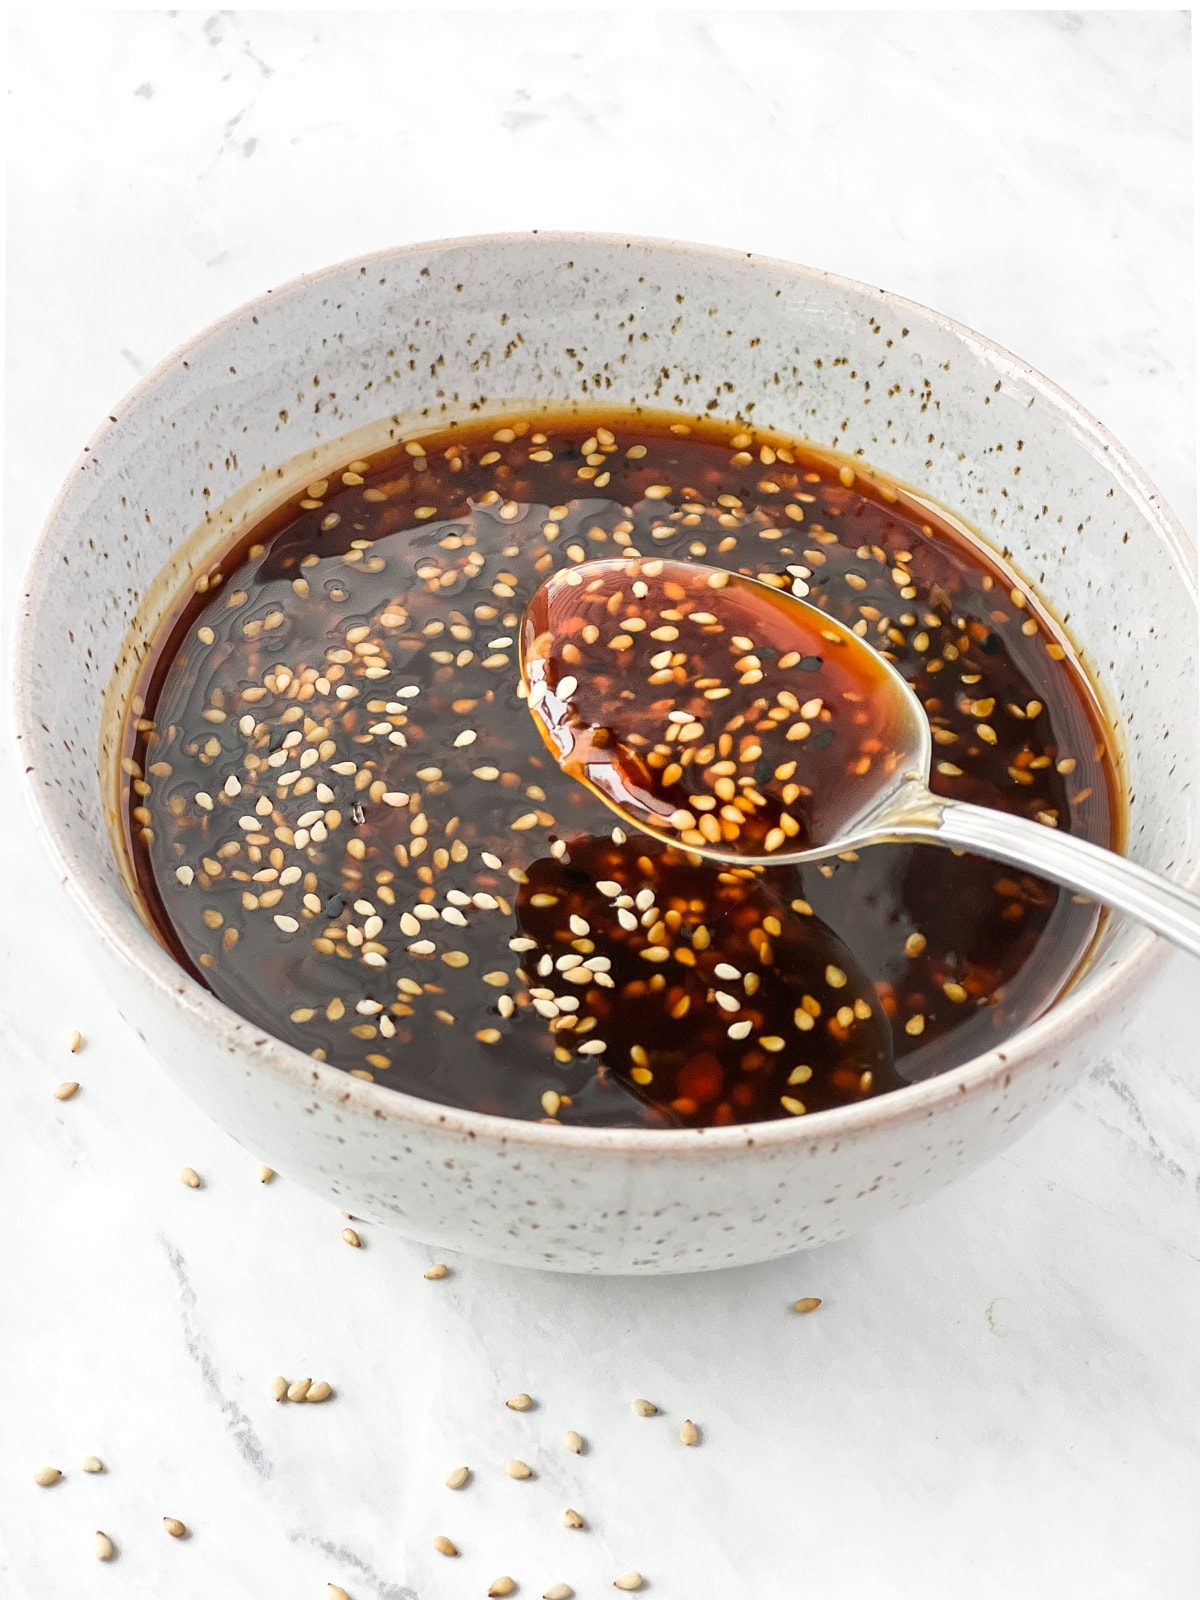 Spoonful of sesame seed topped teriyaki sauce being lifted out of bowl.